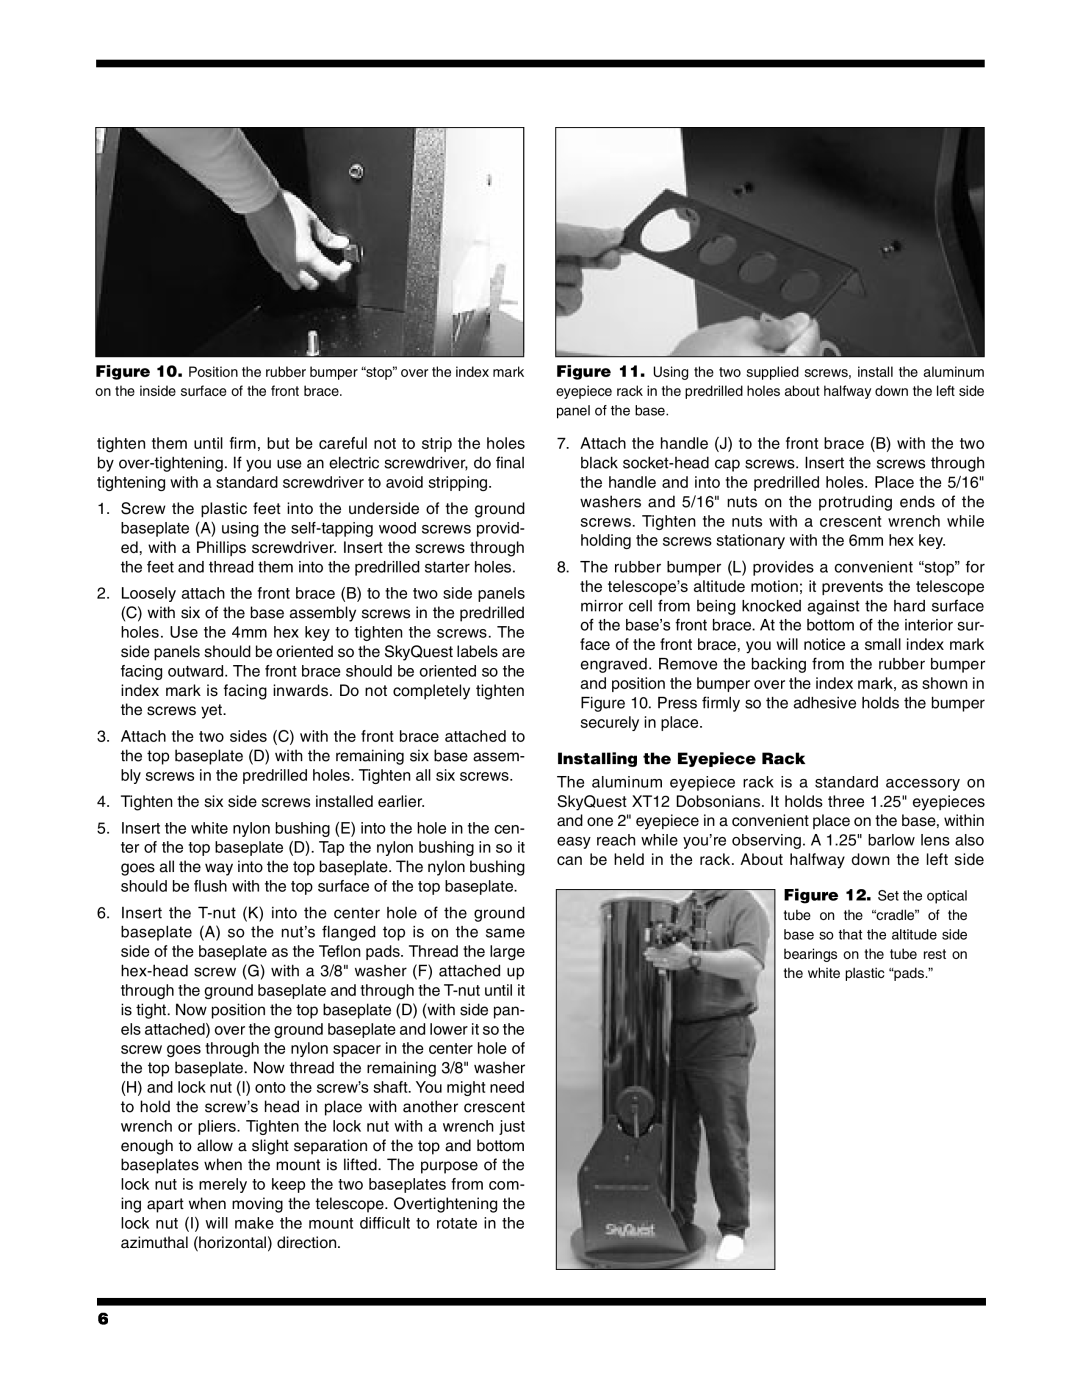 Orion 9966 instruction manual Installing the Eyepiece Rack 